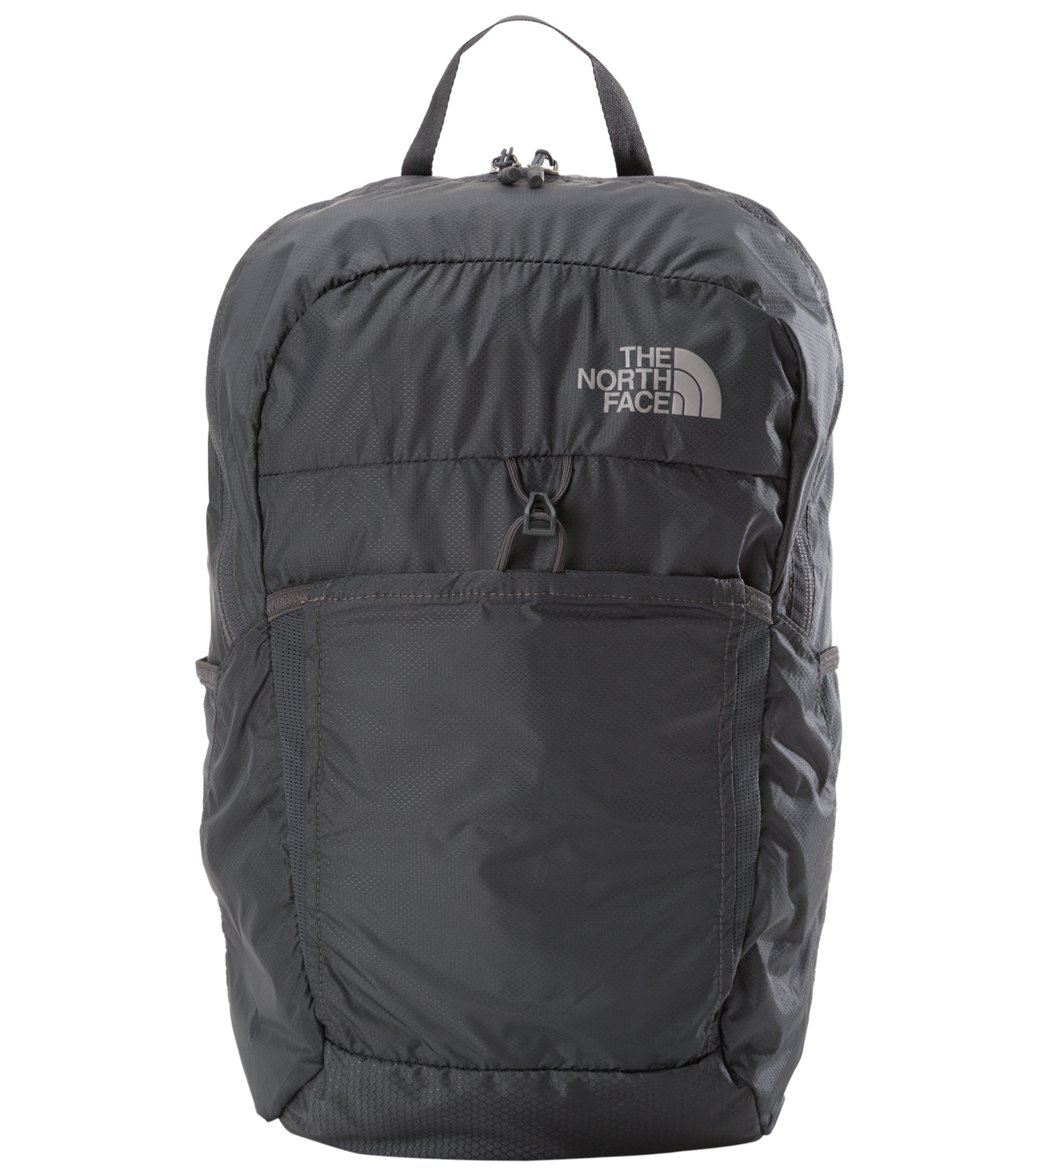 The North Face Flyweight Pack at SwimOutlet.com